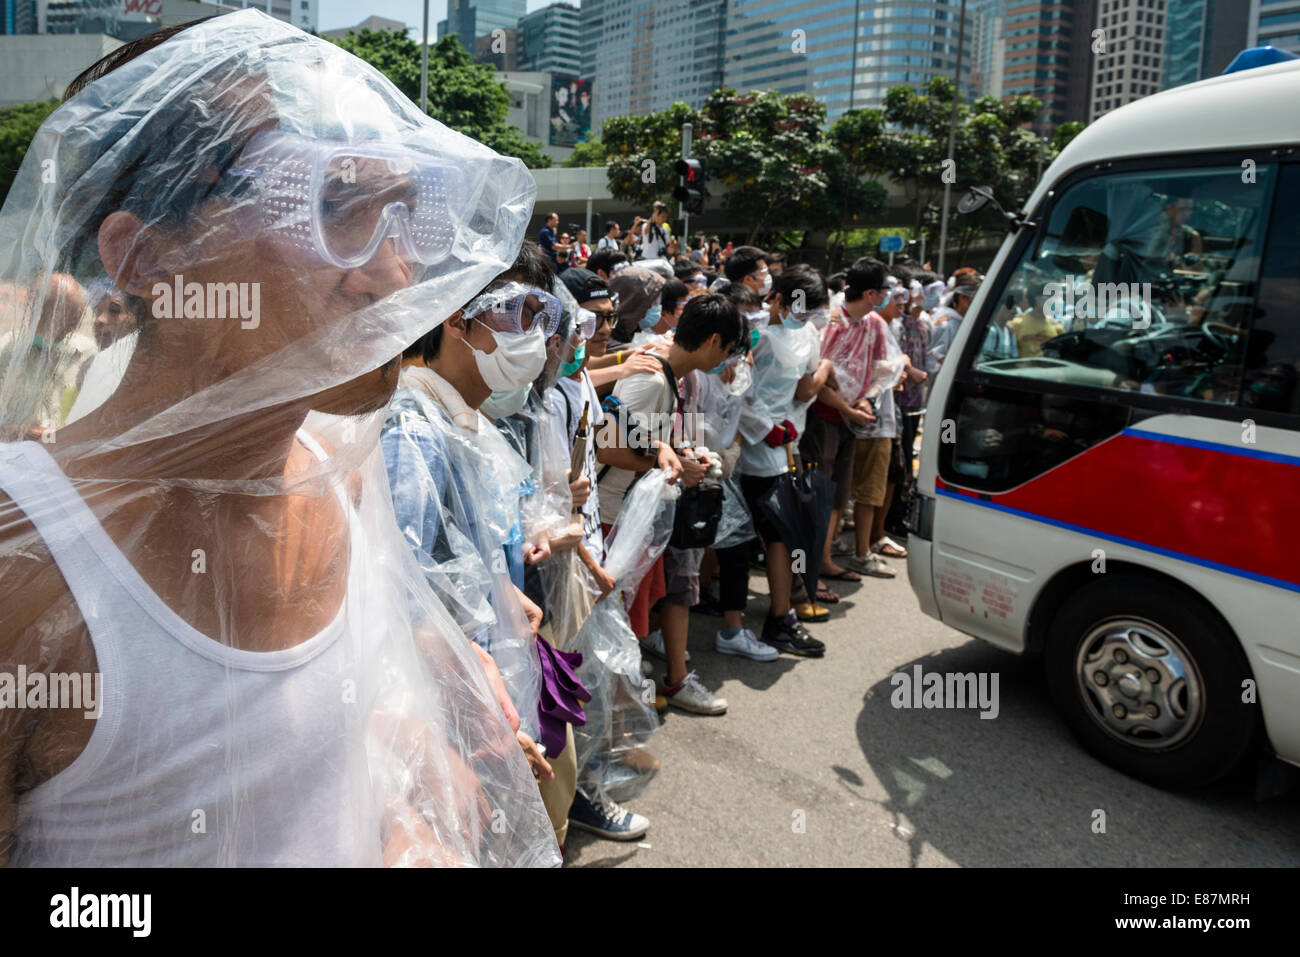 Protesters of Occupy Central are prepared for pepper spray and teargas with plastic raincoats and goggles. Stock Photo